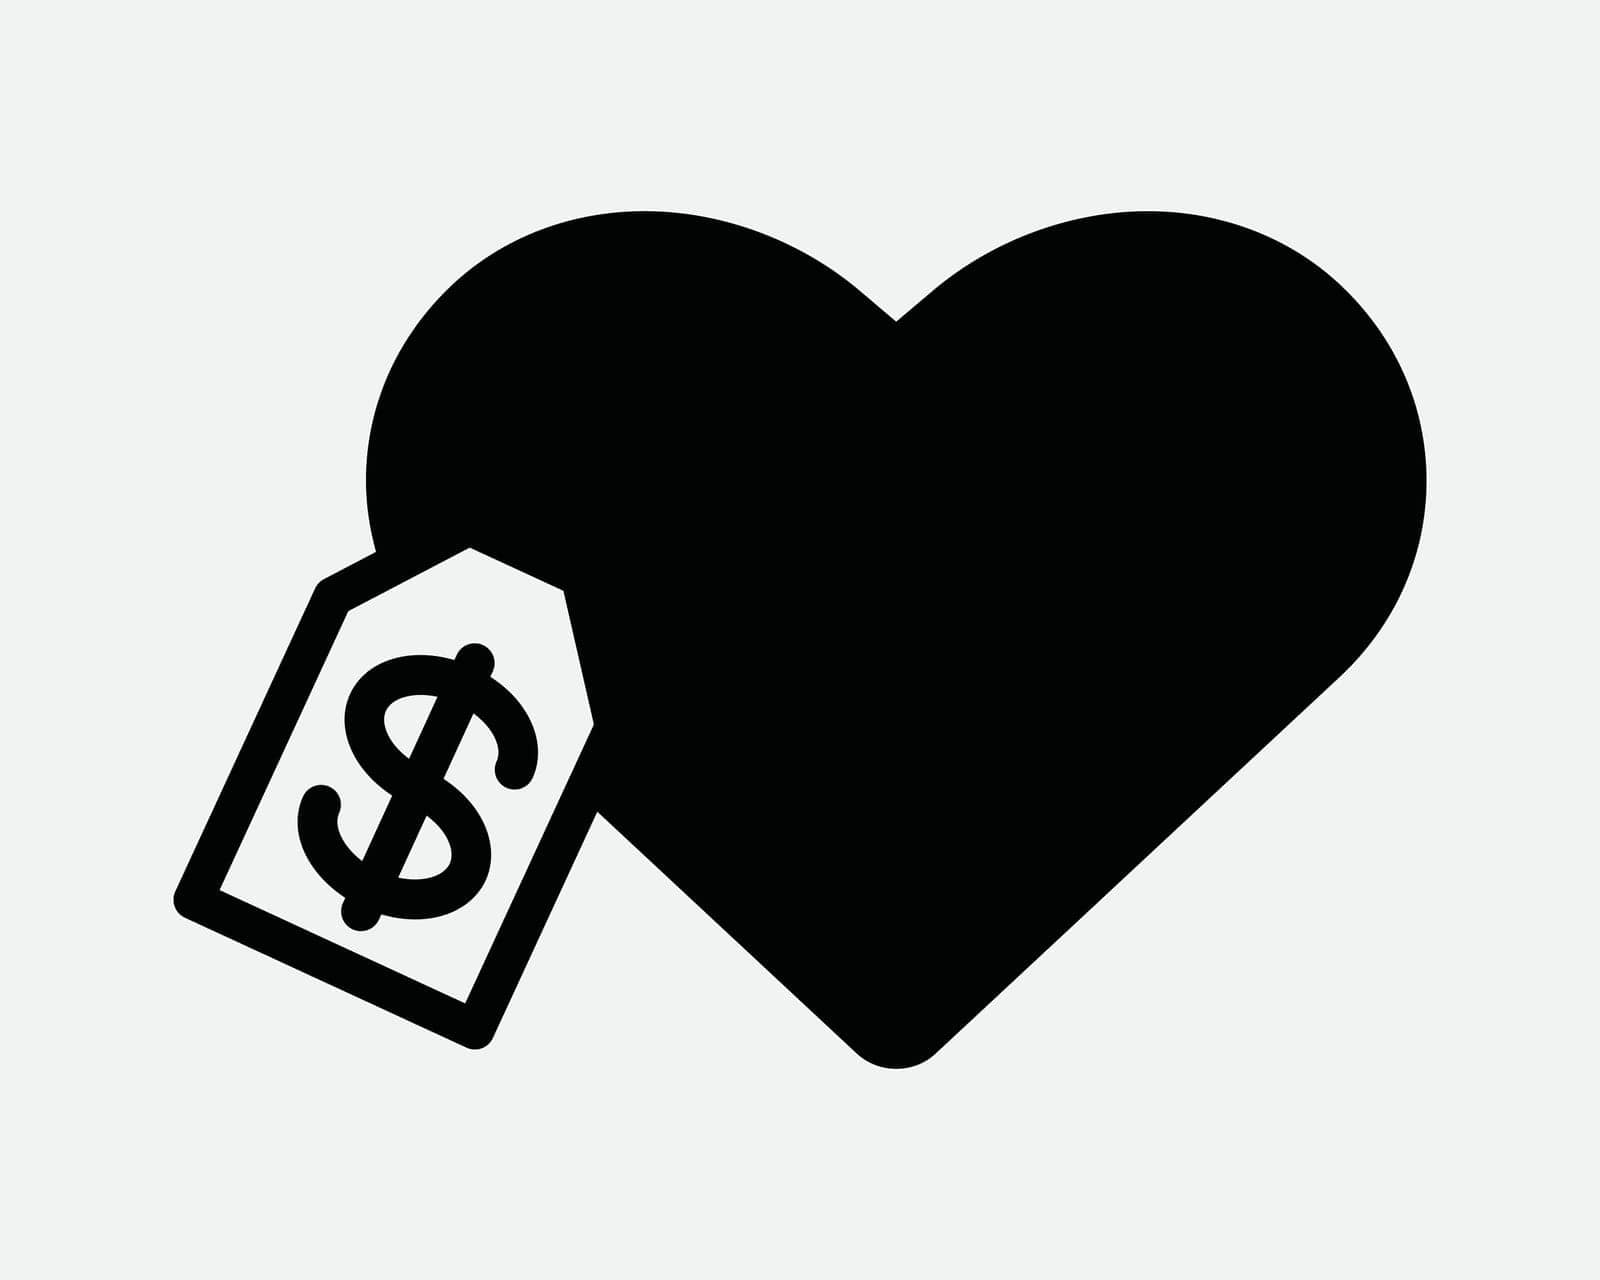 Price of Love Icon. Cost Money Tag Label Heart Valentines Day Gift Sale Expensive Value. Black White Sign Symbol Artwork Graphic Clipart EPS Vector